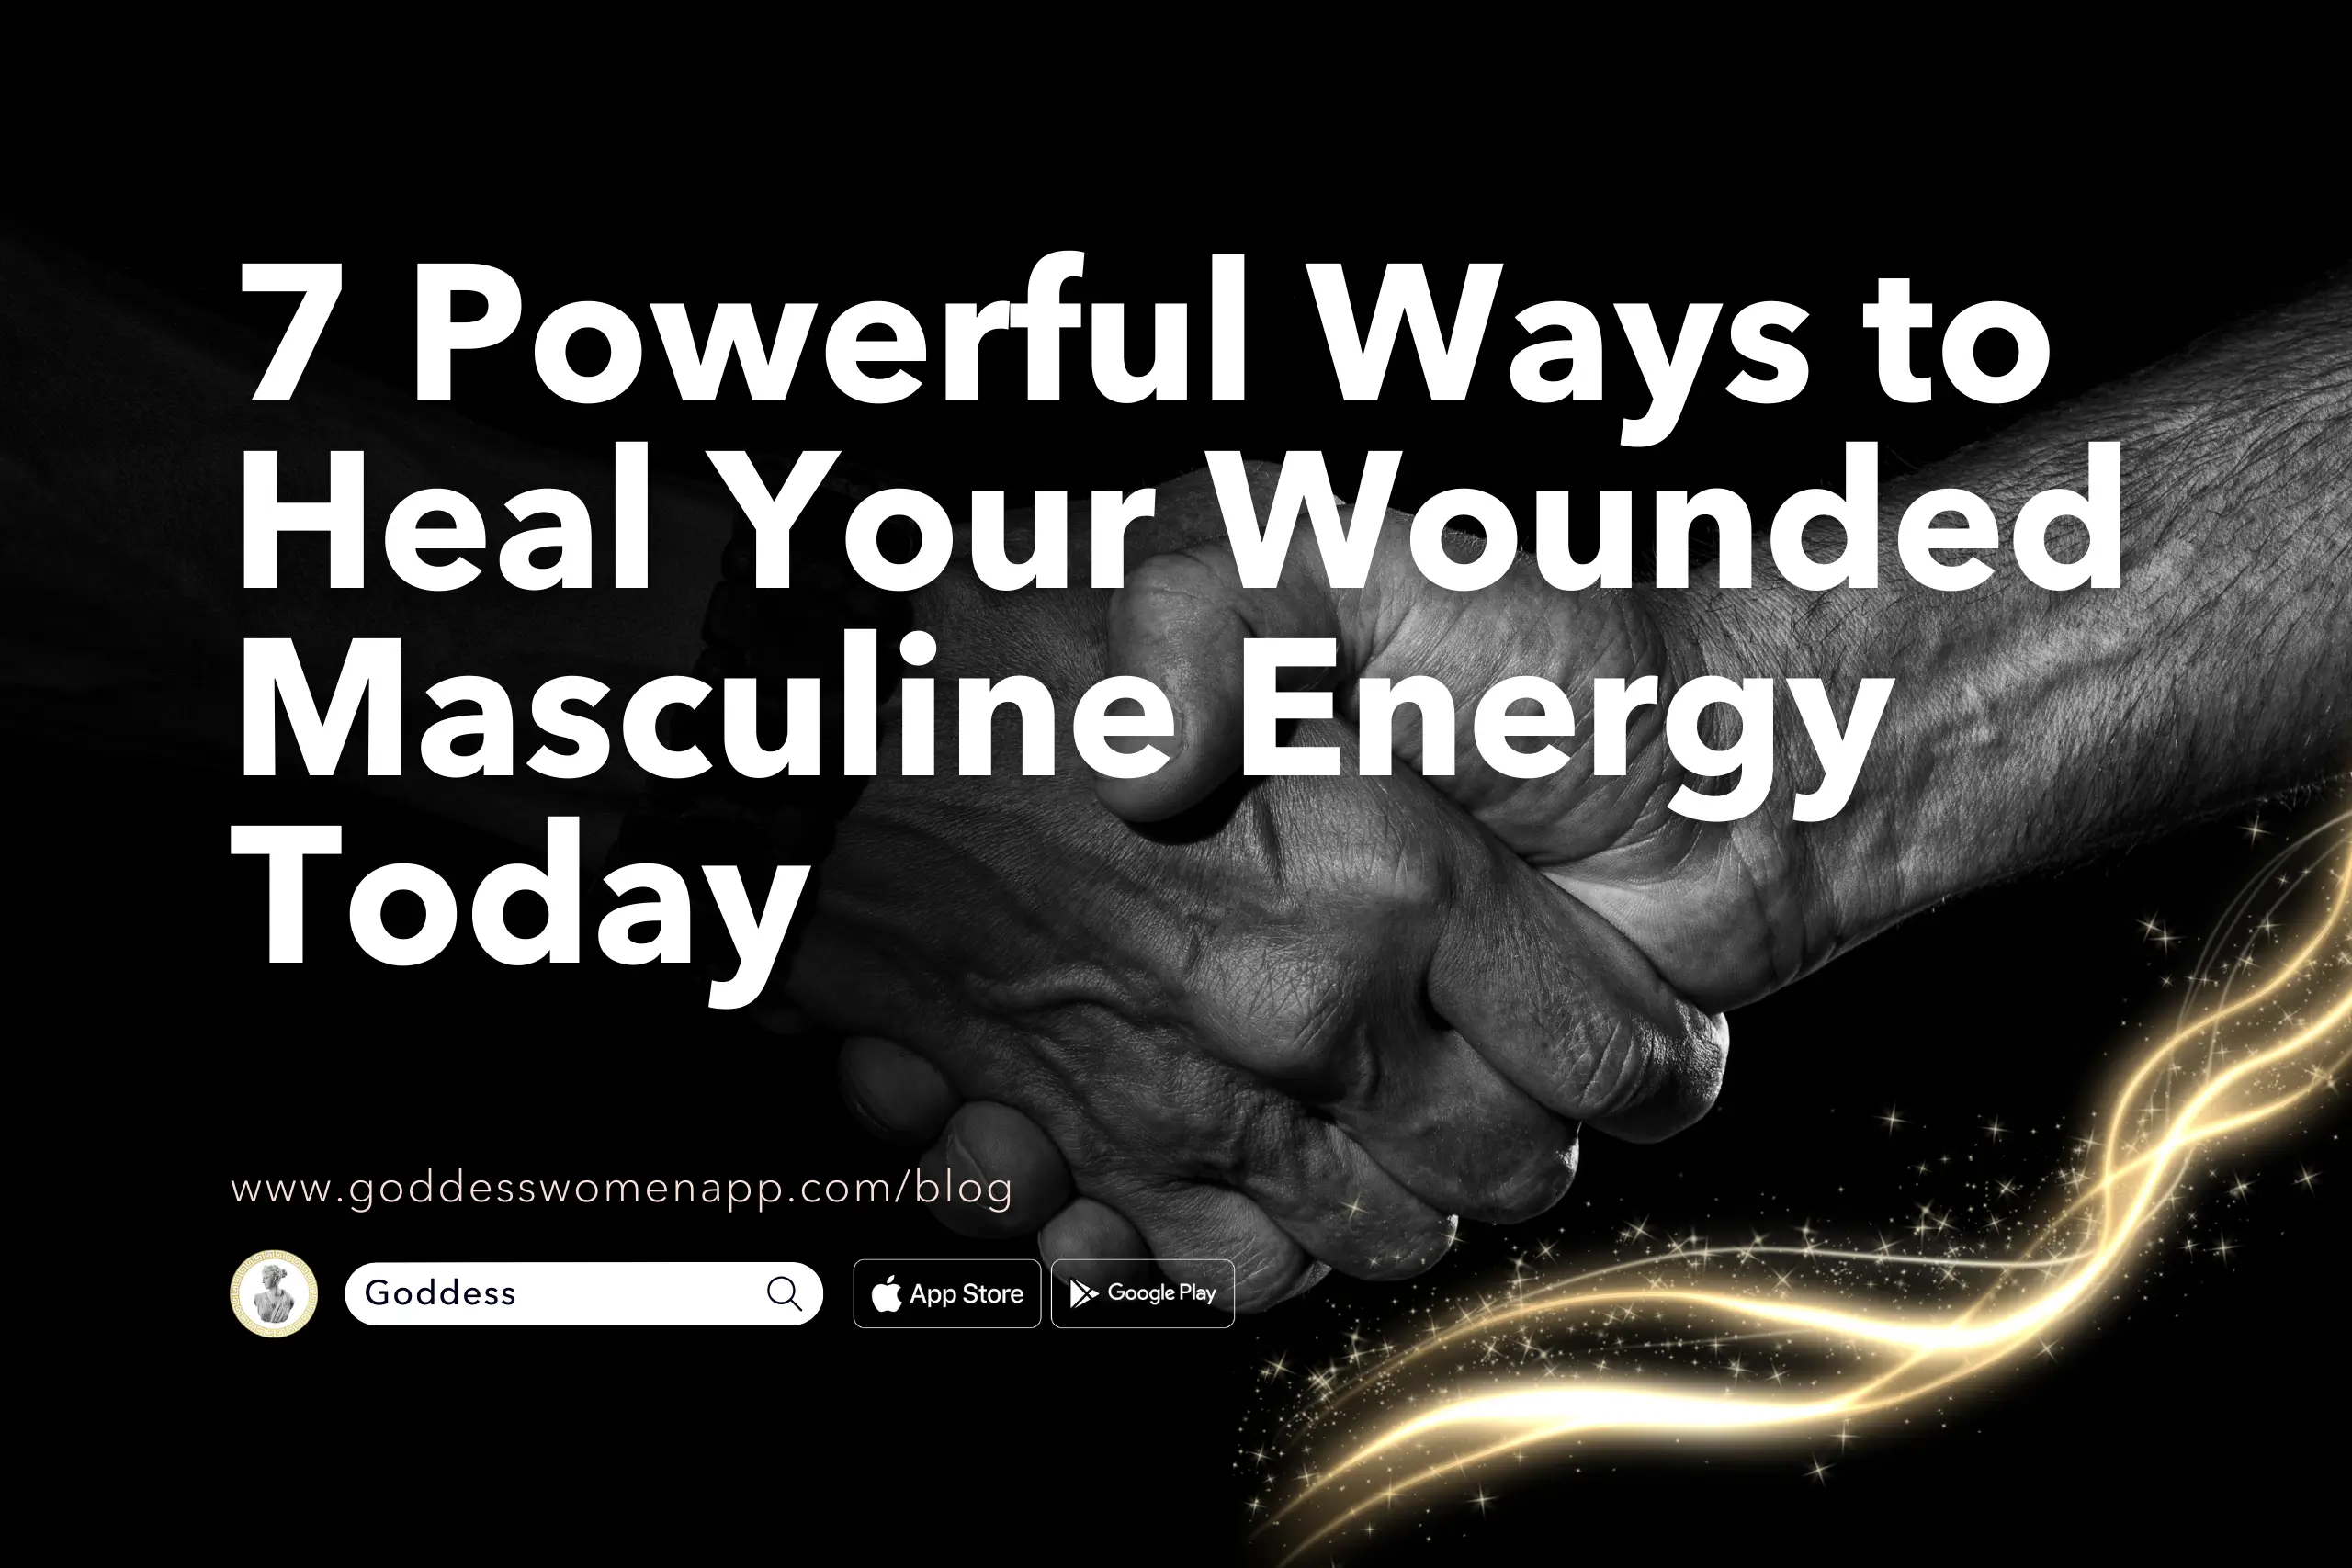 7 Powerful Ways to Heal Your Wounded Masculine Energy Today